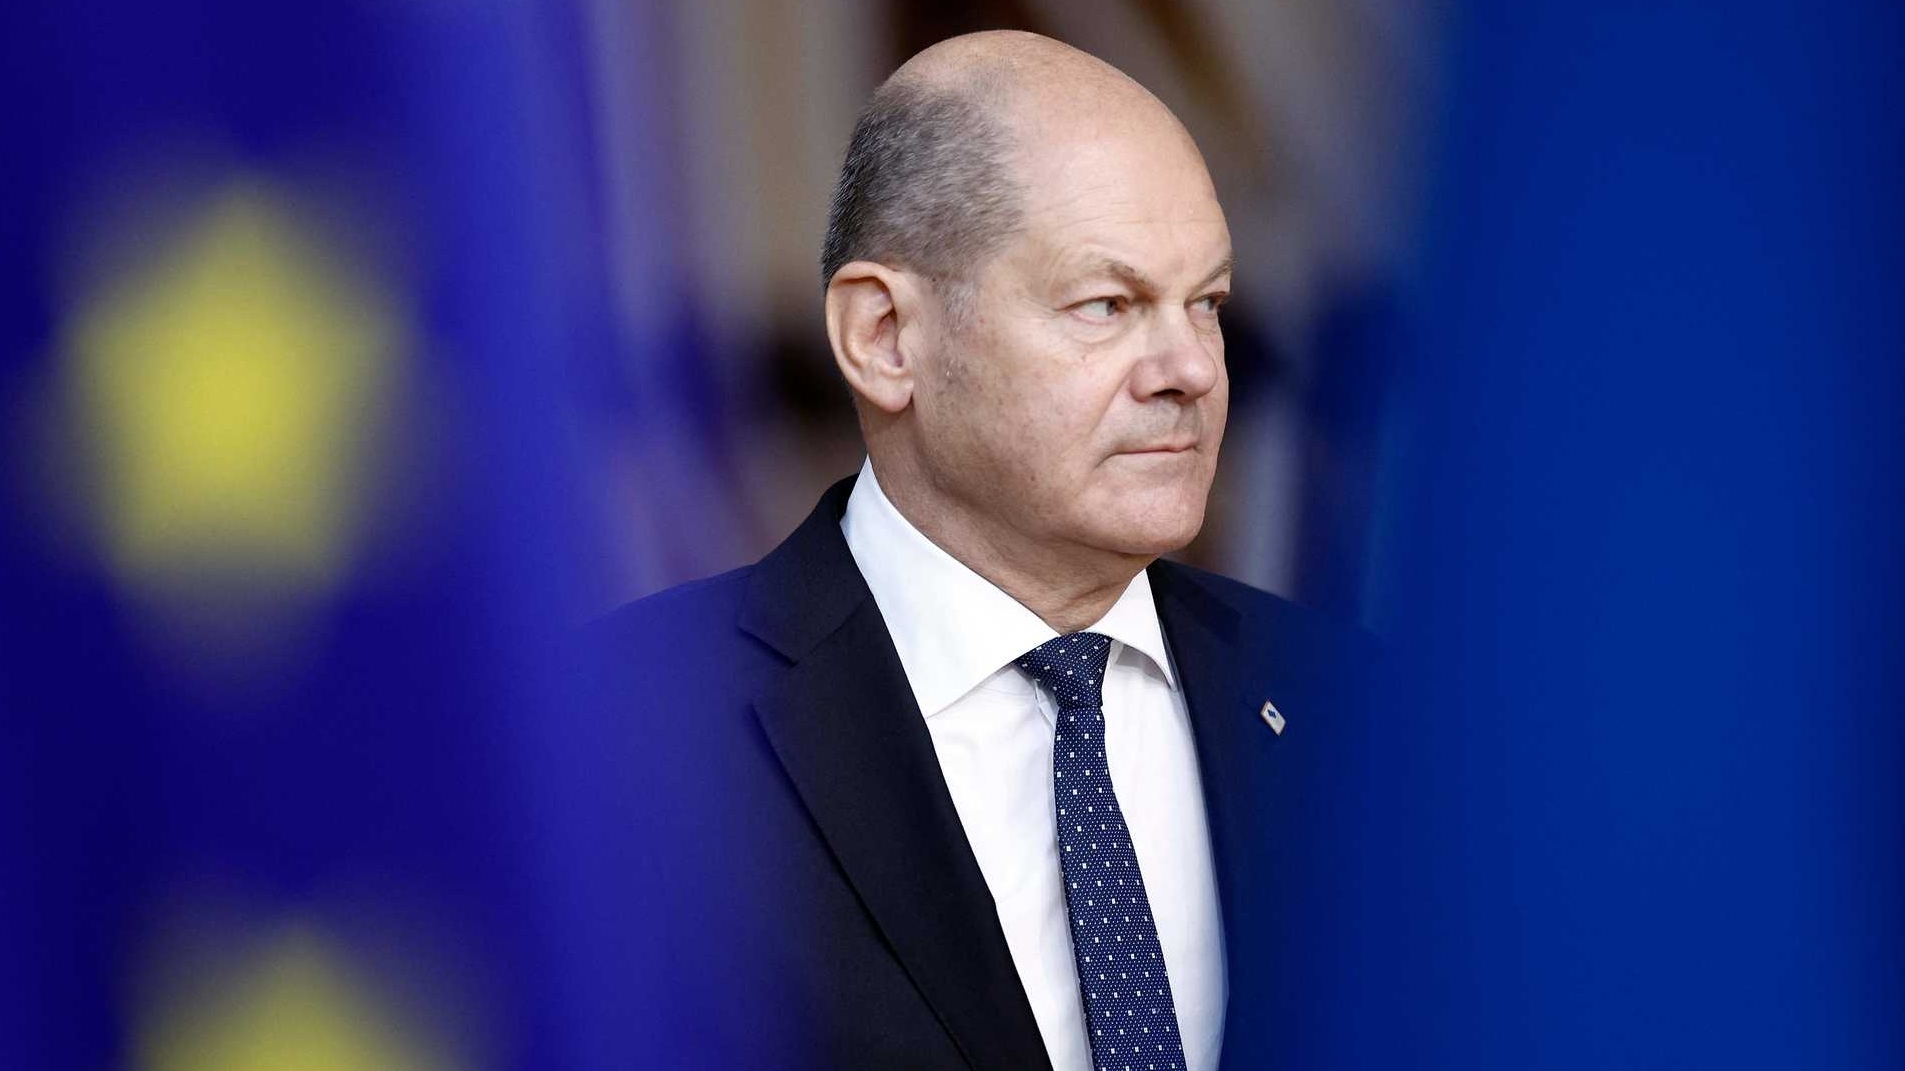 Capitulation of Germany, defeat of Scholz. USA leads Europe today